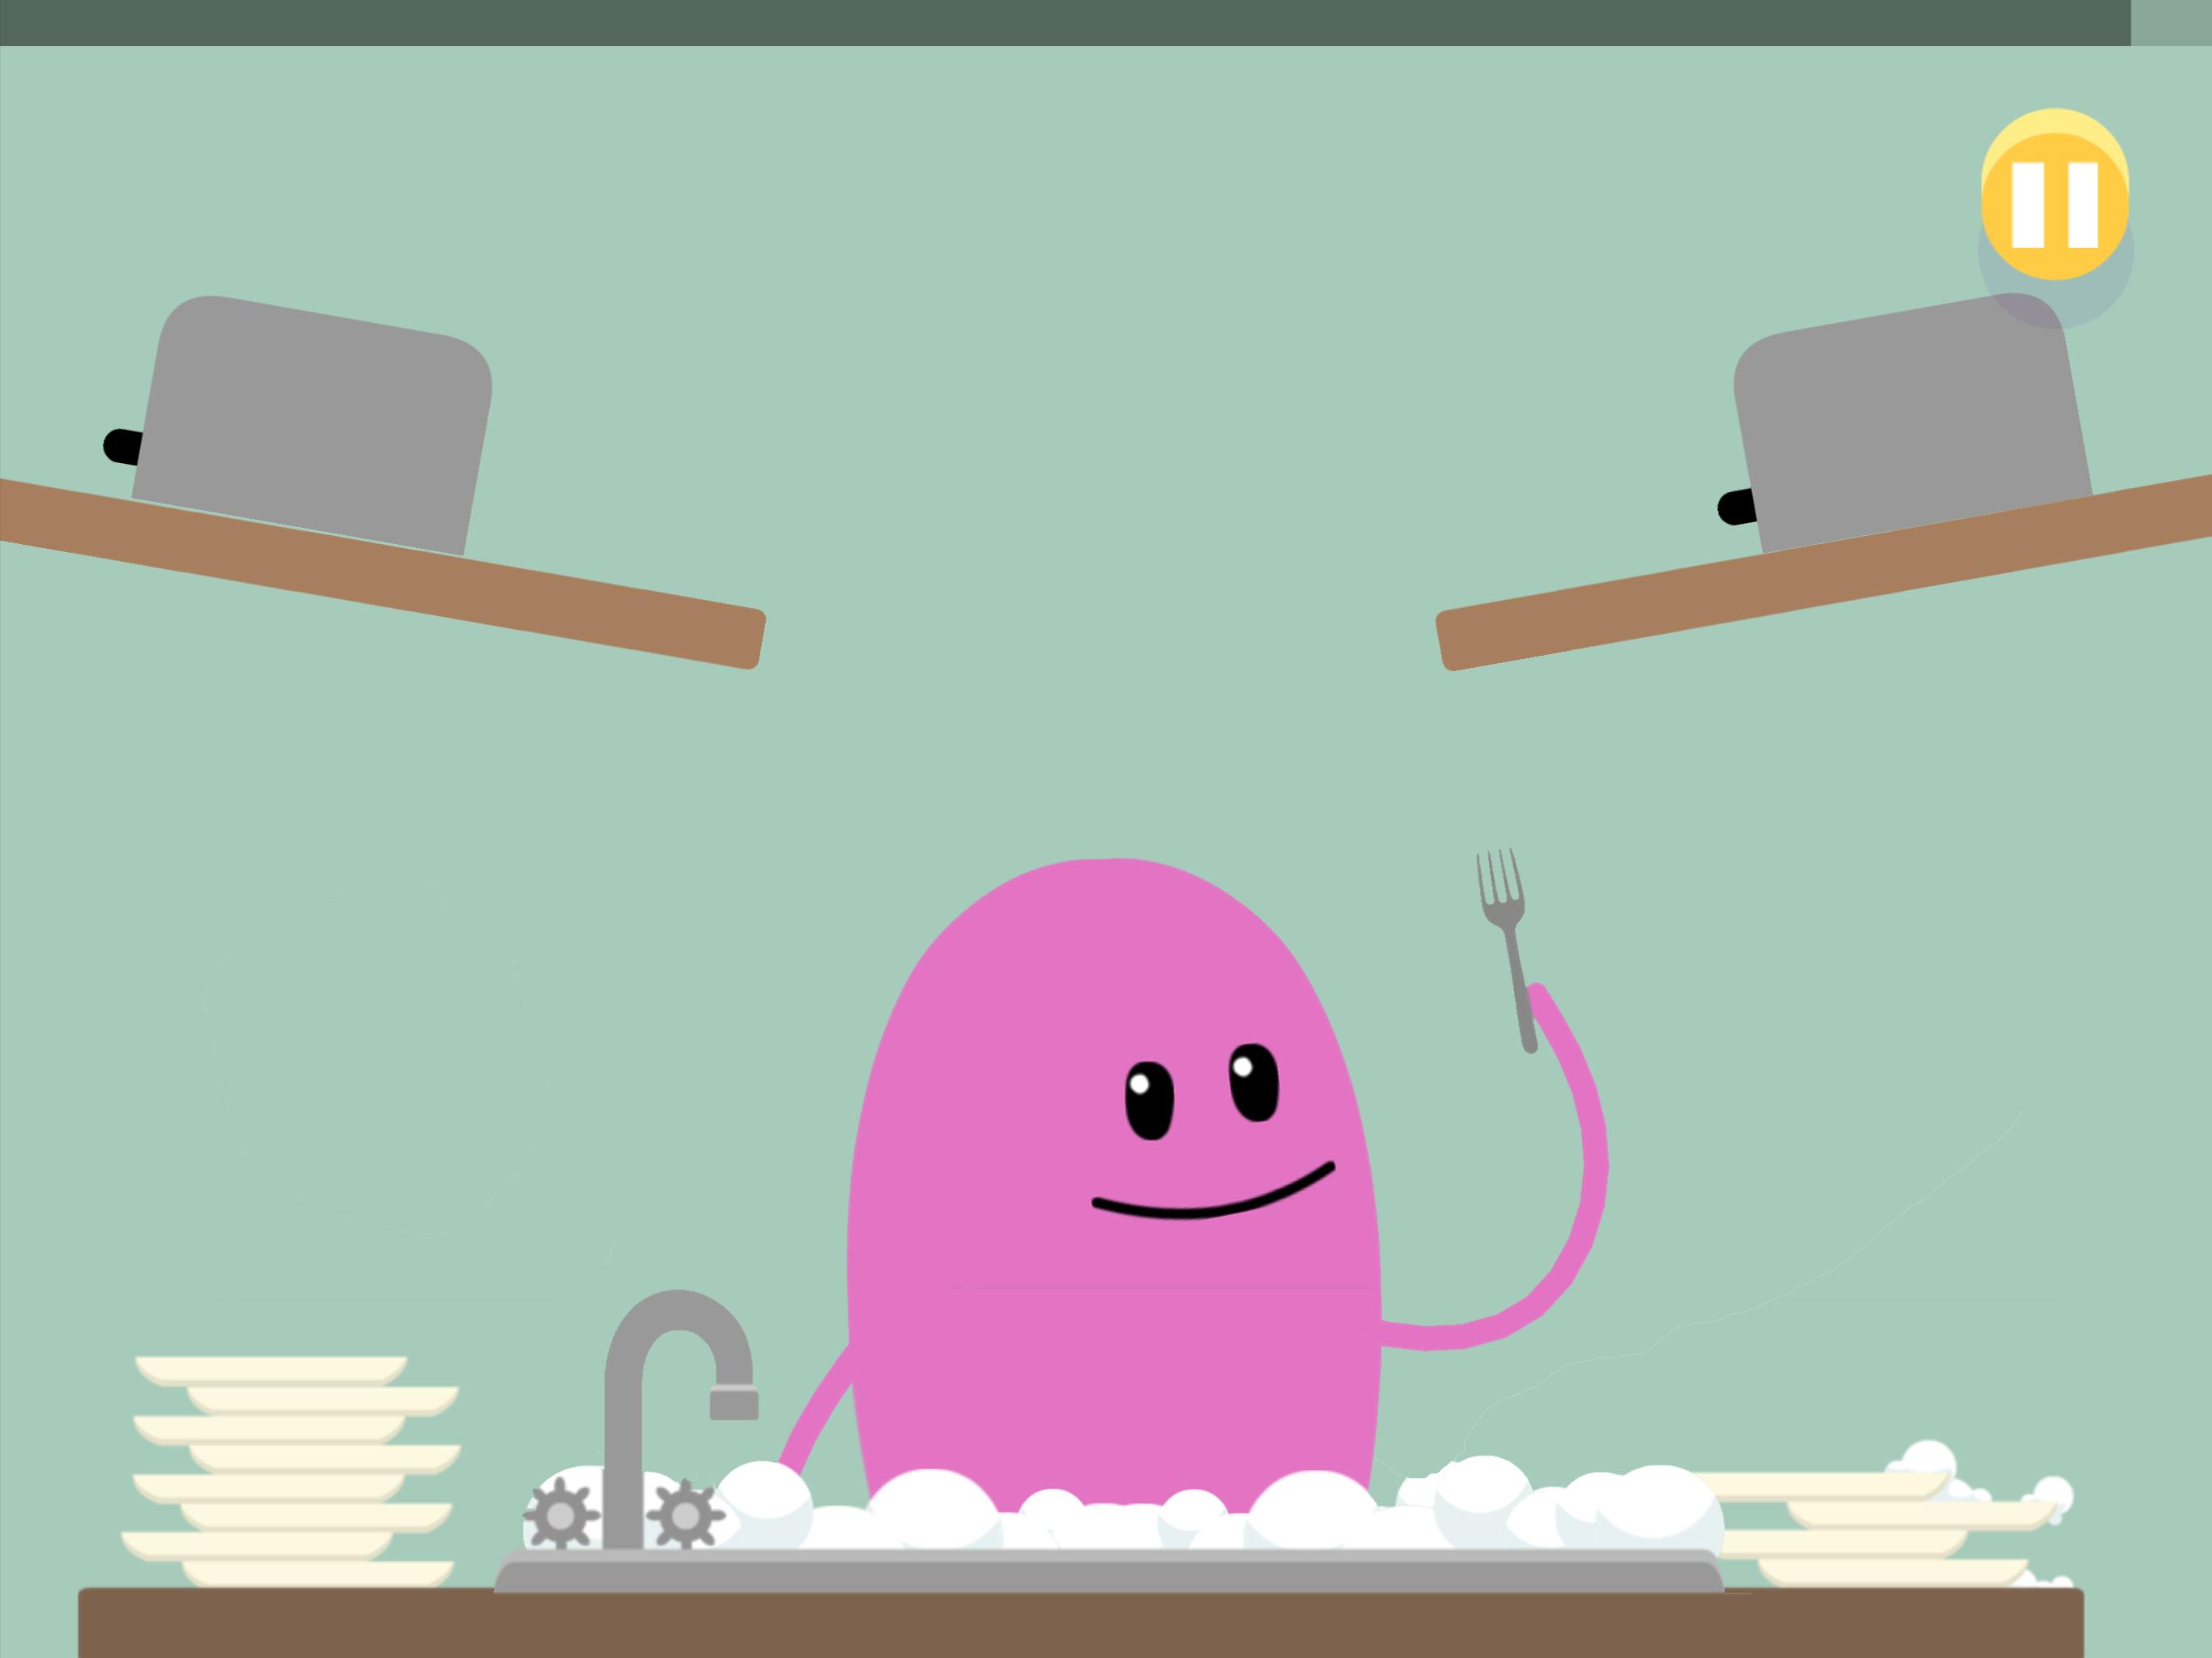 Dumb Ways for Android APK Download